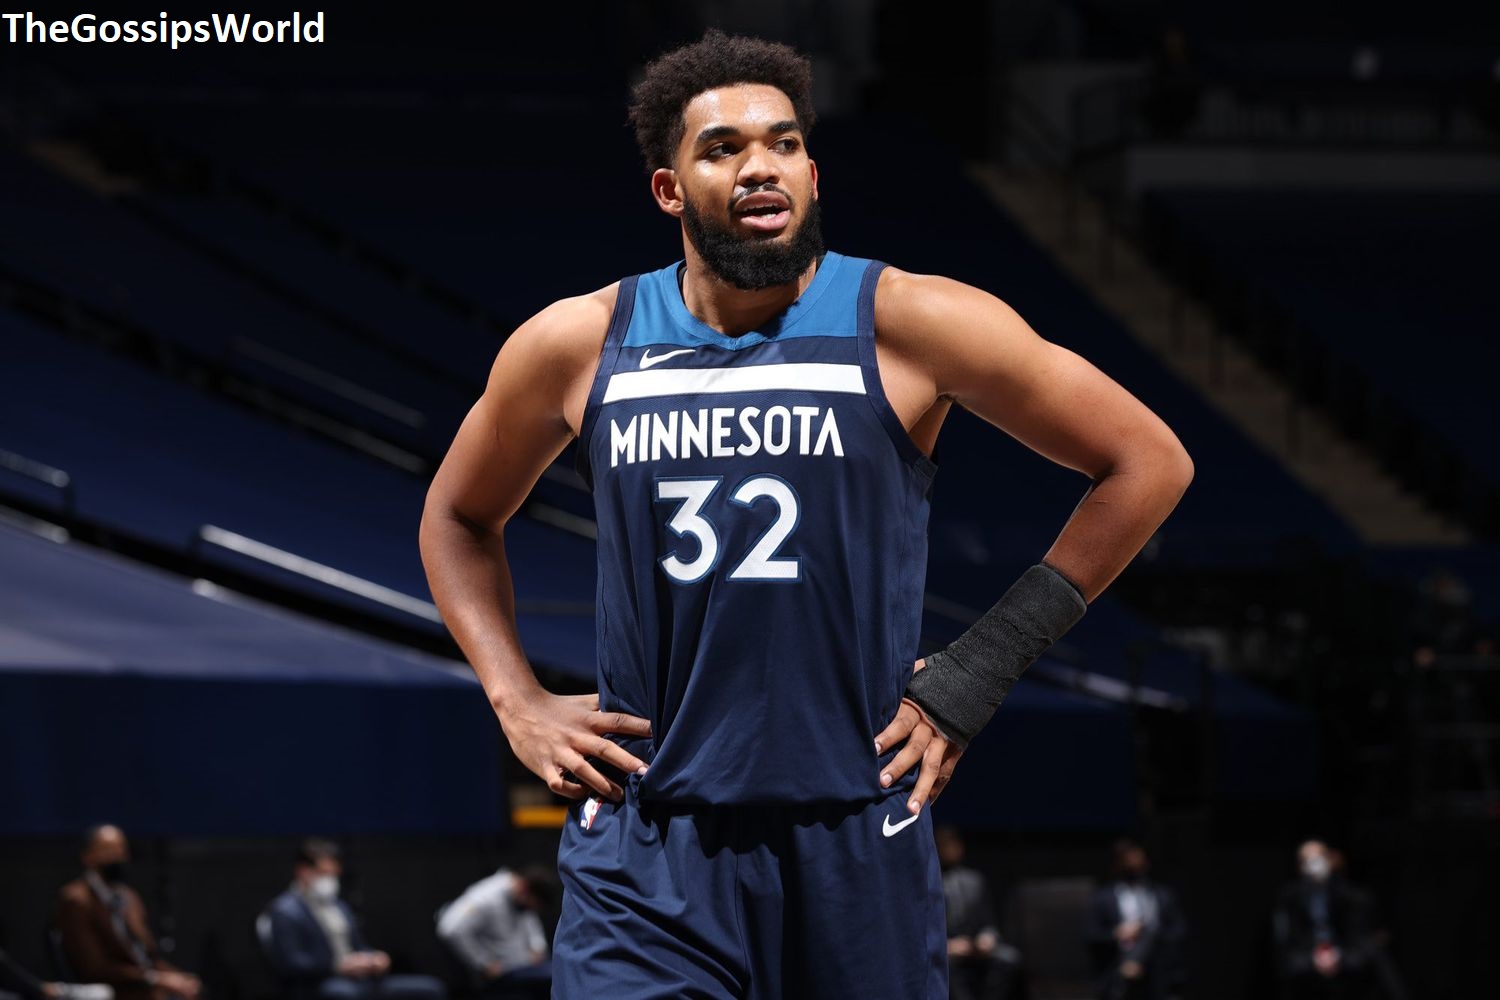 How Tall Is Karl-Anthony Towns?